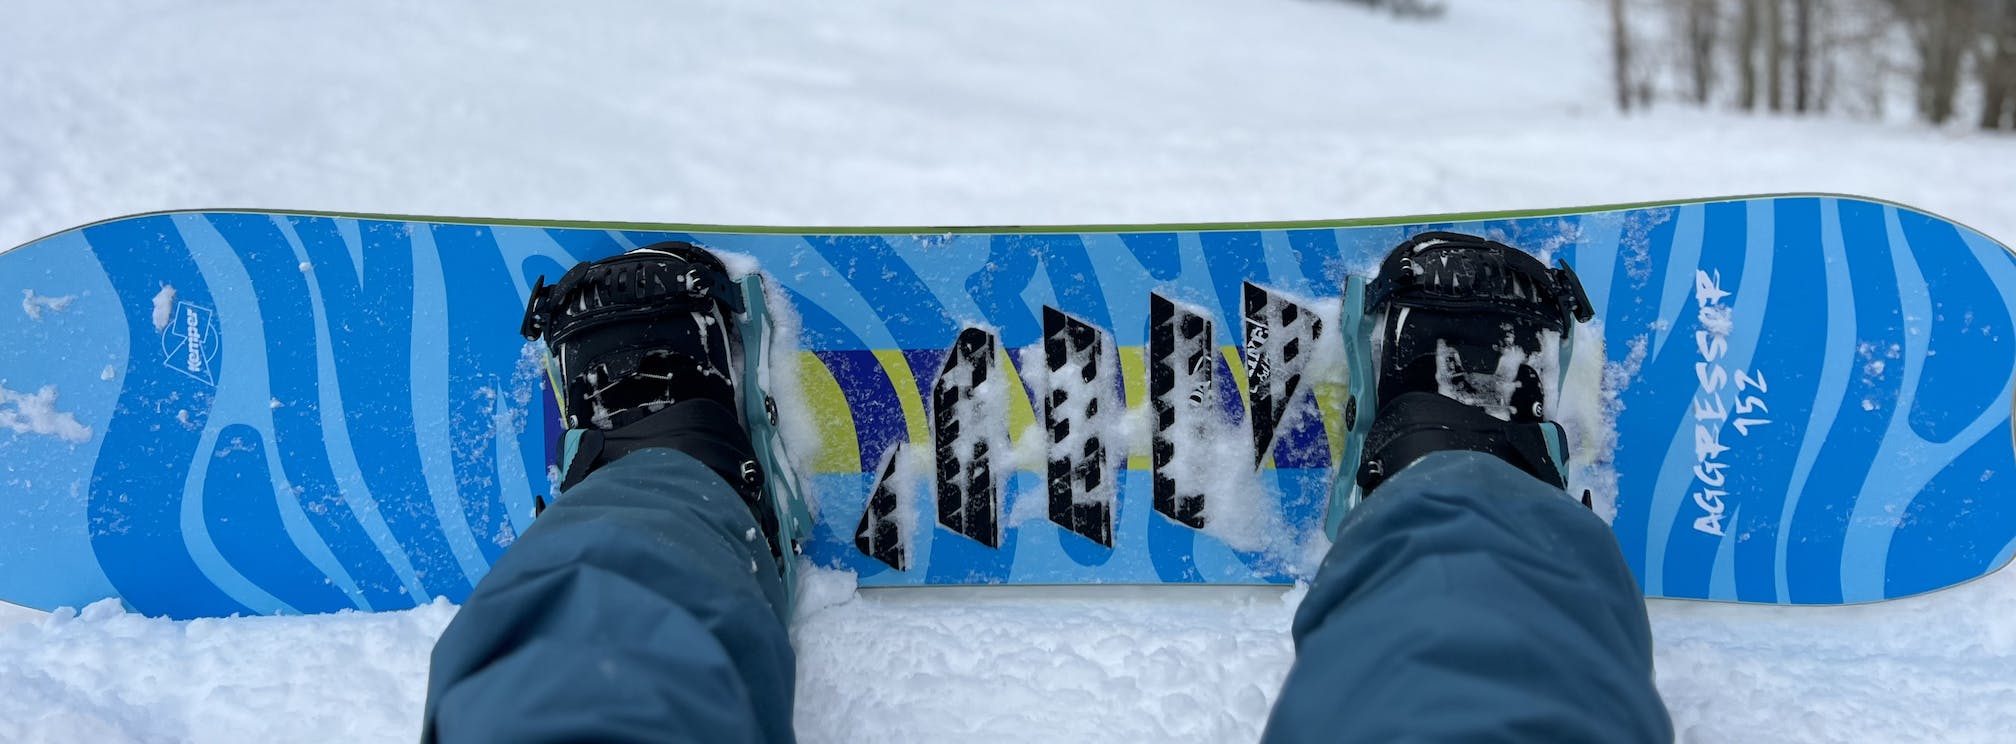 Top down view of the Kemper Aggressor 1989/1990 Snowboard · 2022. 